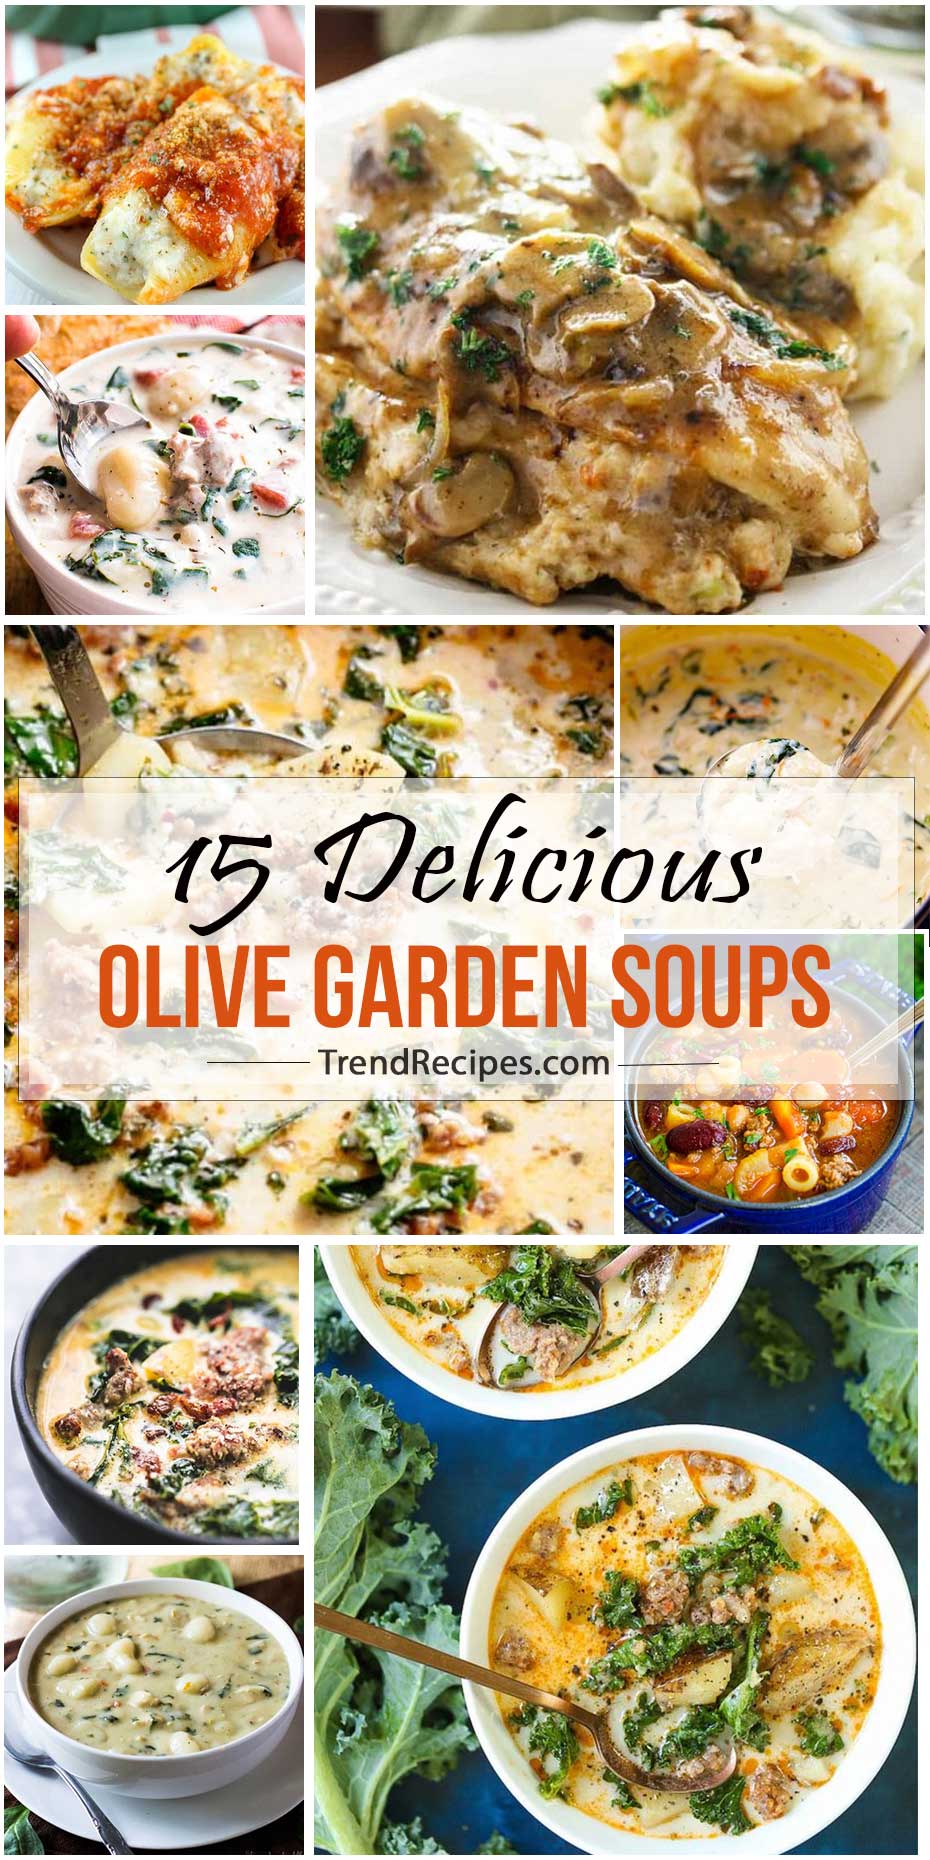 15 Delicious Olive Garden Soups You Should Try